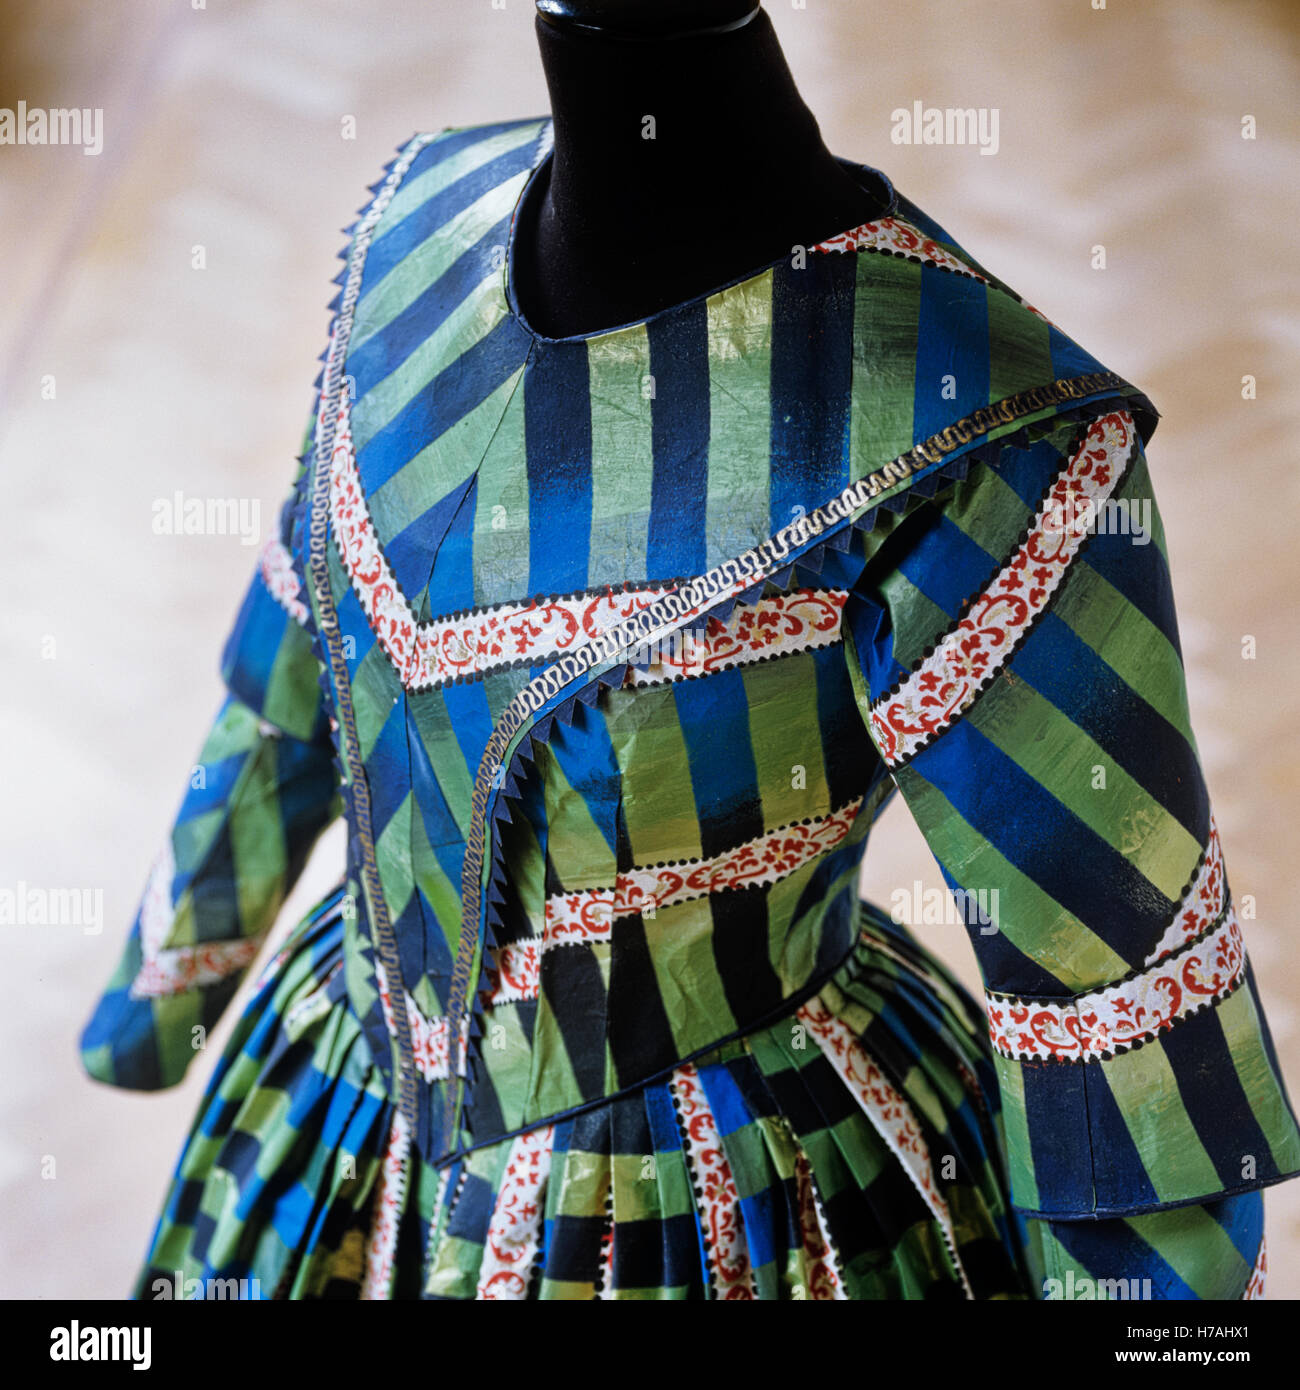 Green and blue striped historical replica paper dress with red foliate detailling, by Isabelle de Borchgrave Stock Photo